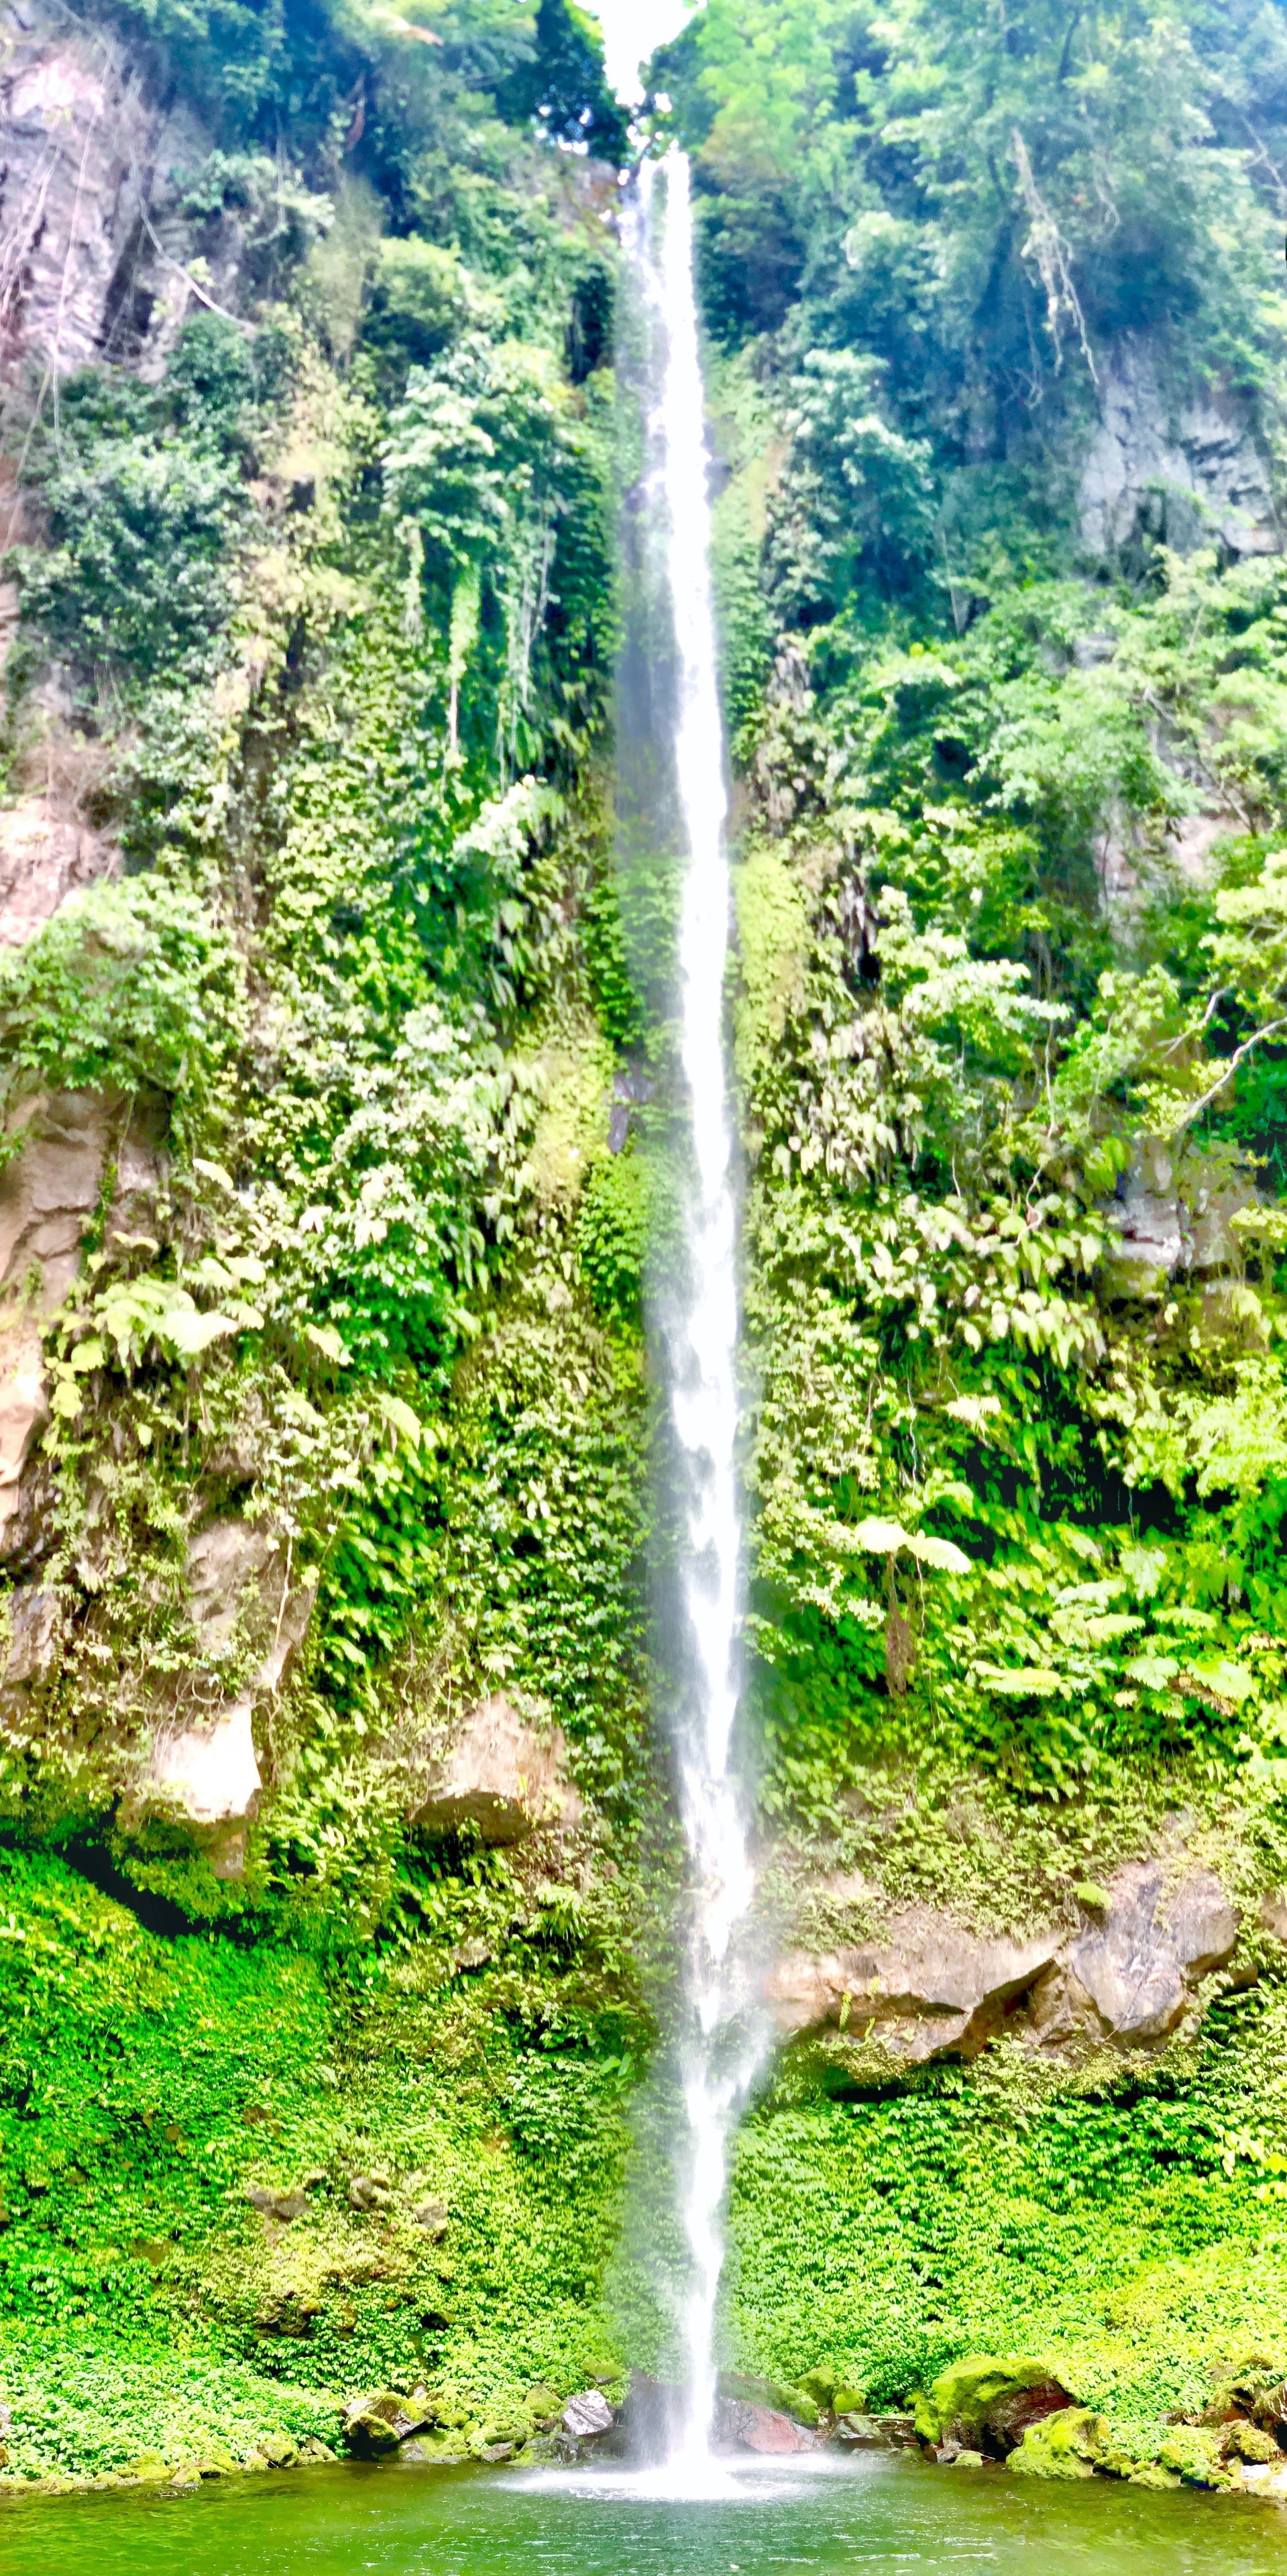 Greener than green. A falls where the heights makes you dizzy because of its near sky rocket height. The great Katibawasan Falls of Camiguin Island. A one of a kind falls that you need to experience.